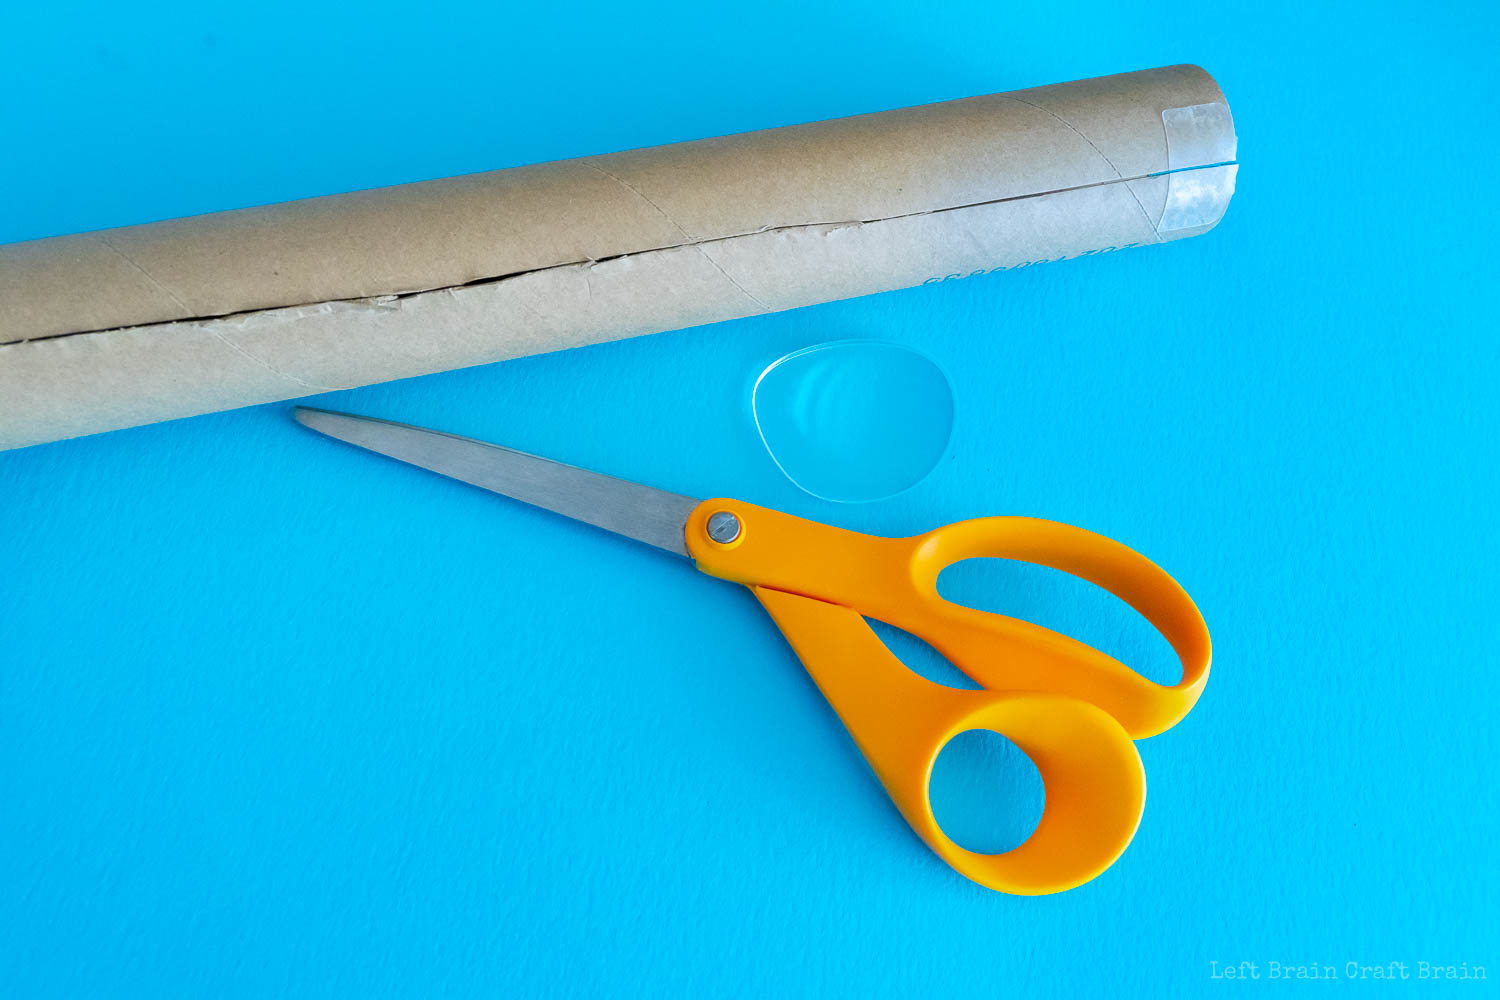 how to make a telescope - paper towel roll with a slit down the side with eyeglass lens and orange handles scissors sitting underneath on blue paper